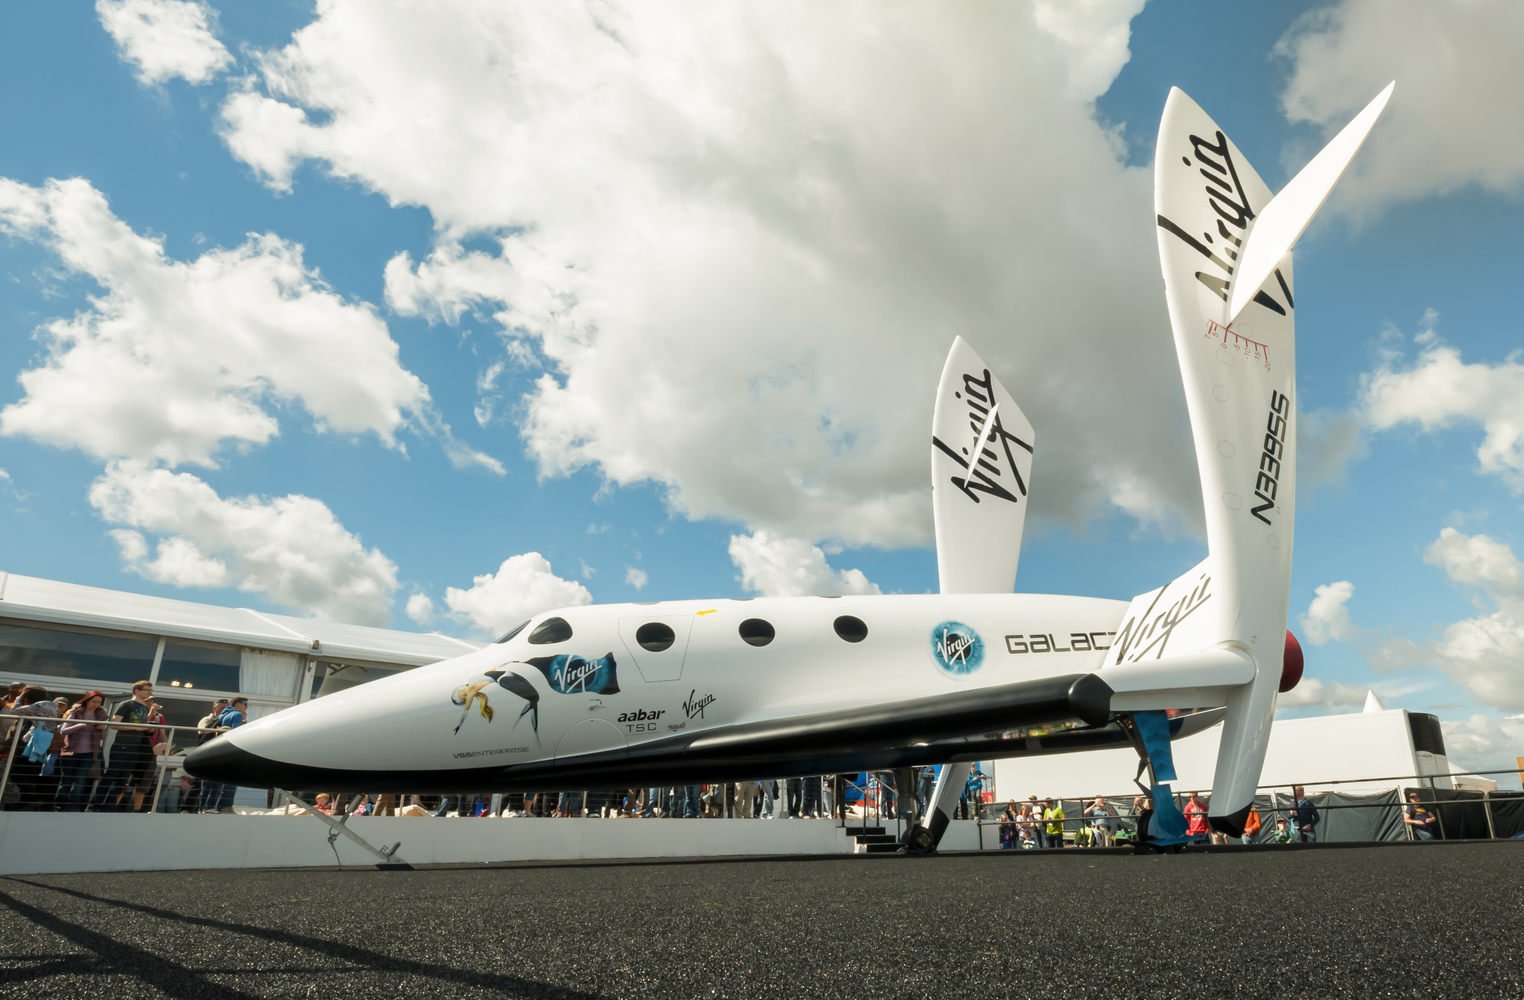 Virgin Galactic Stock Is Skyrocketing, Will Take Bitcoin to Shoot You Into Space